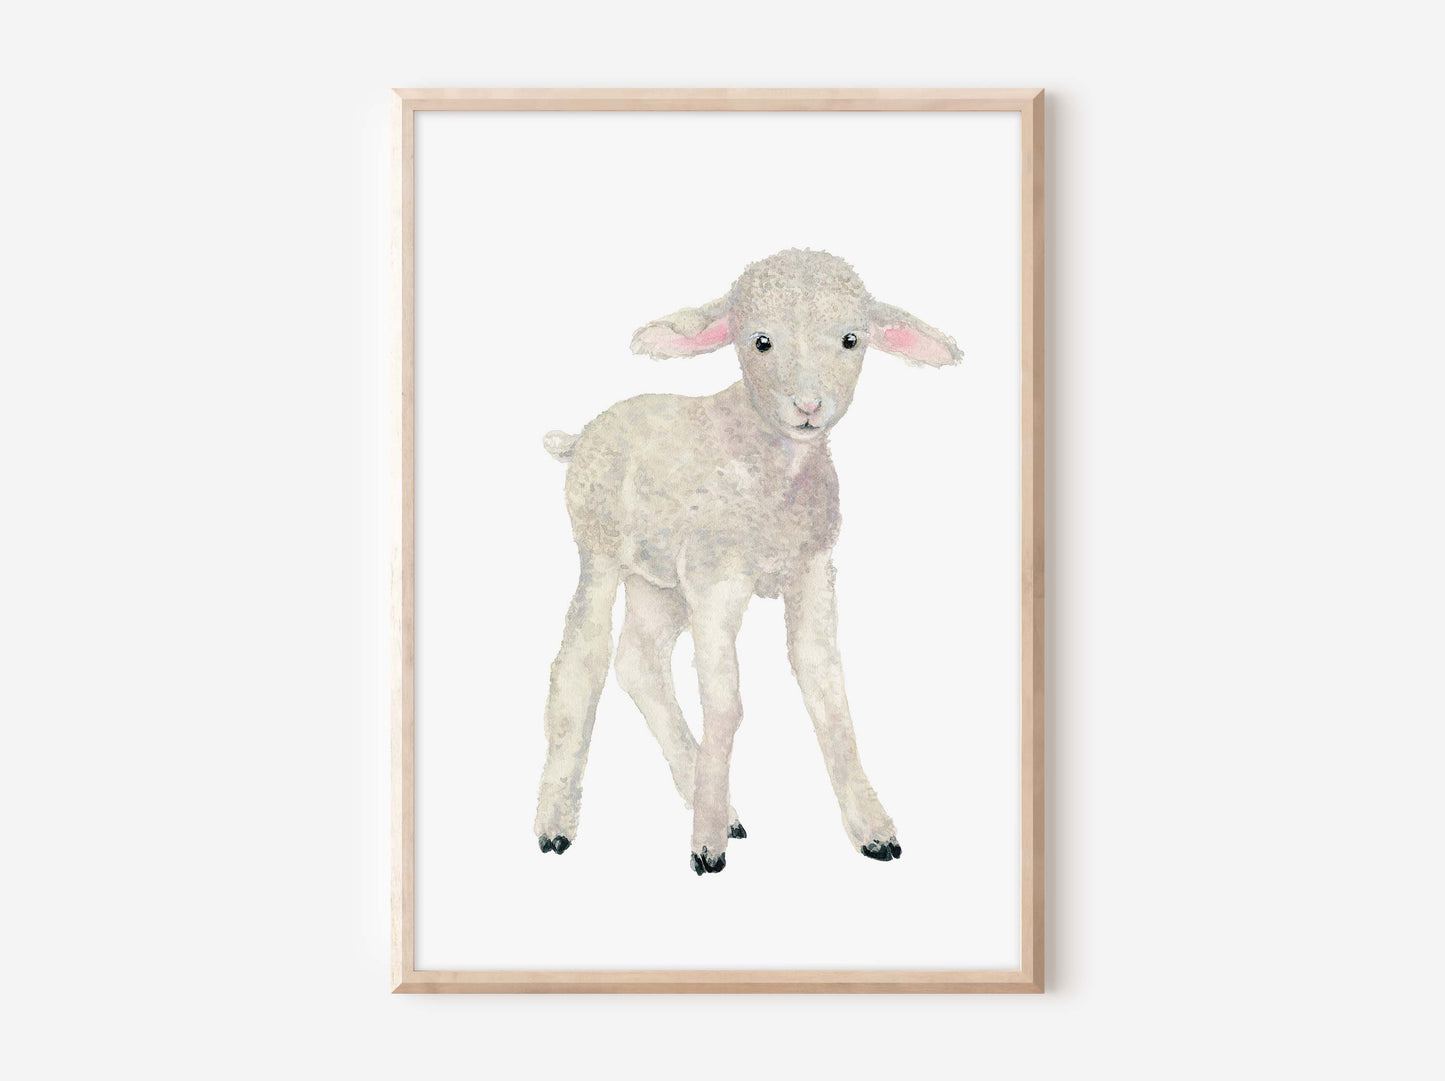 a white sheep with a pink ear standing in front of a white wall